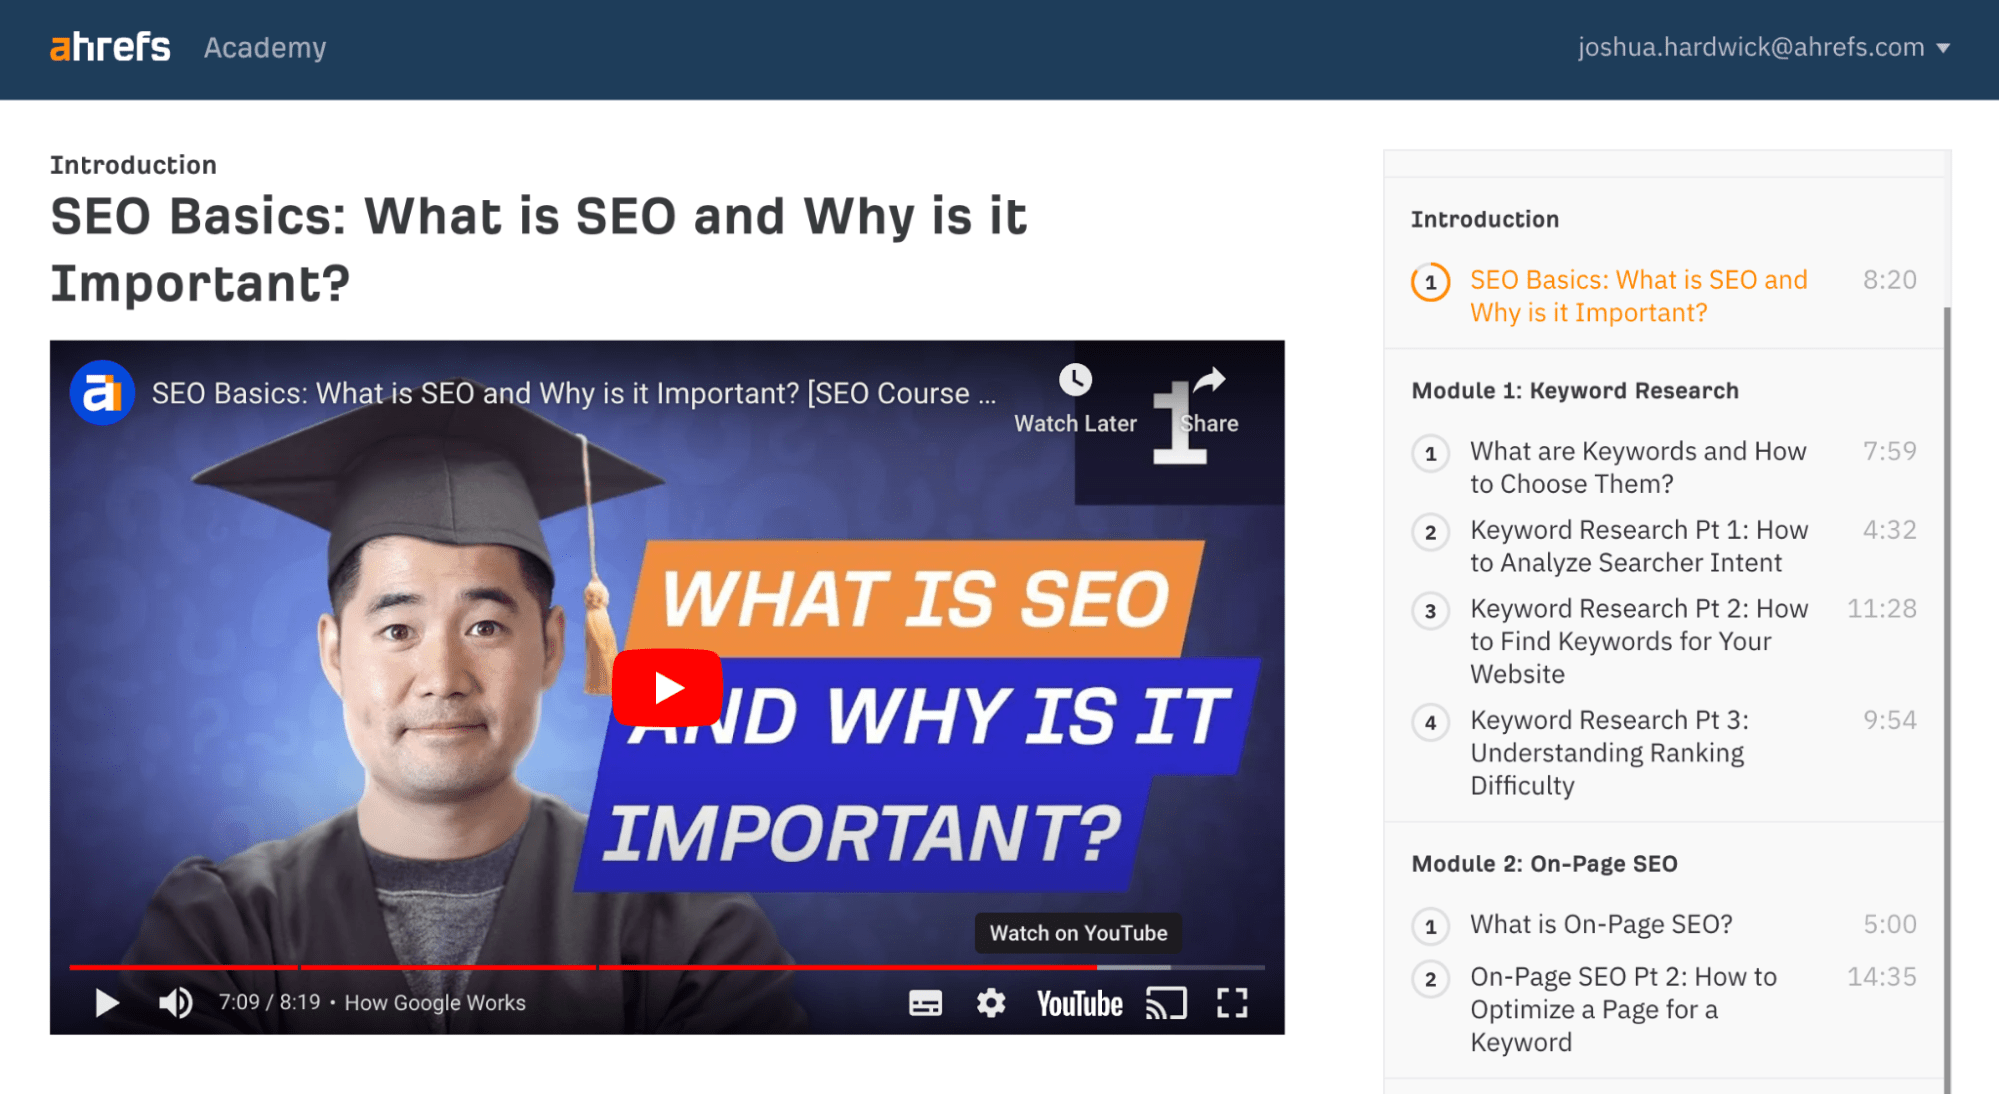 The first lesson in our SEO course for beginners